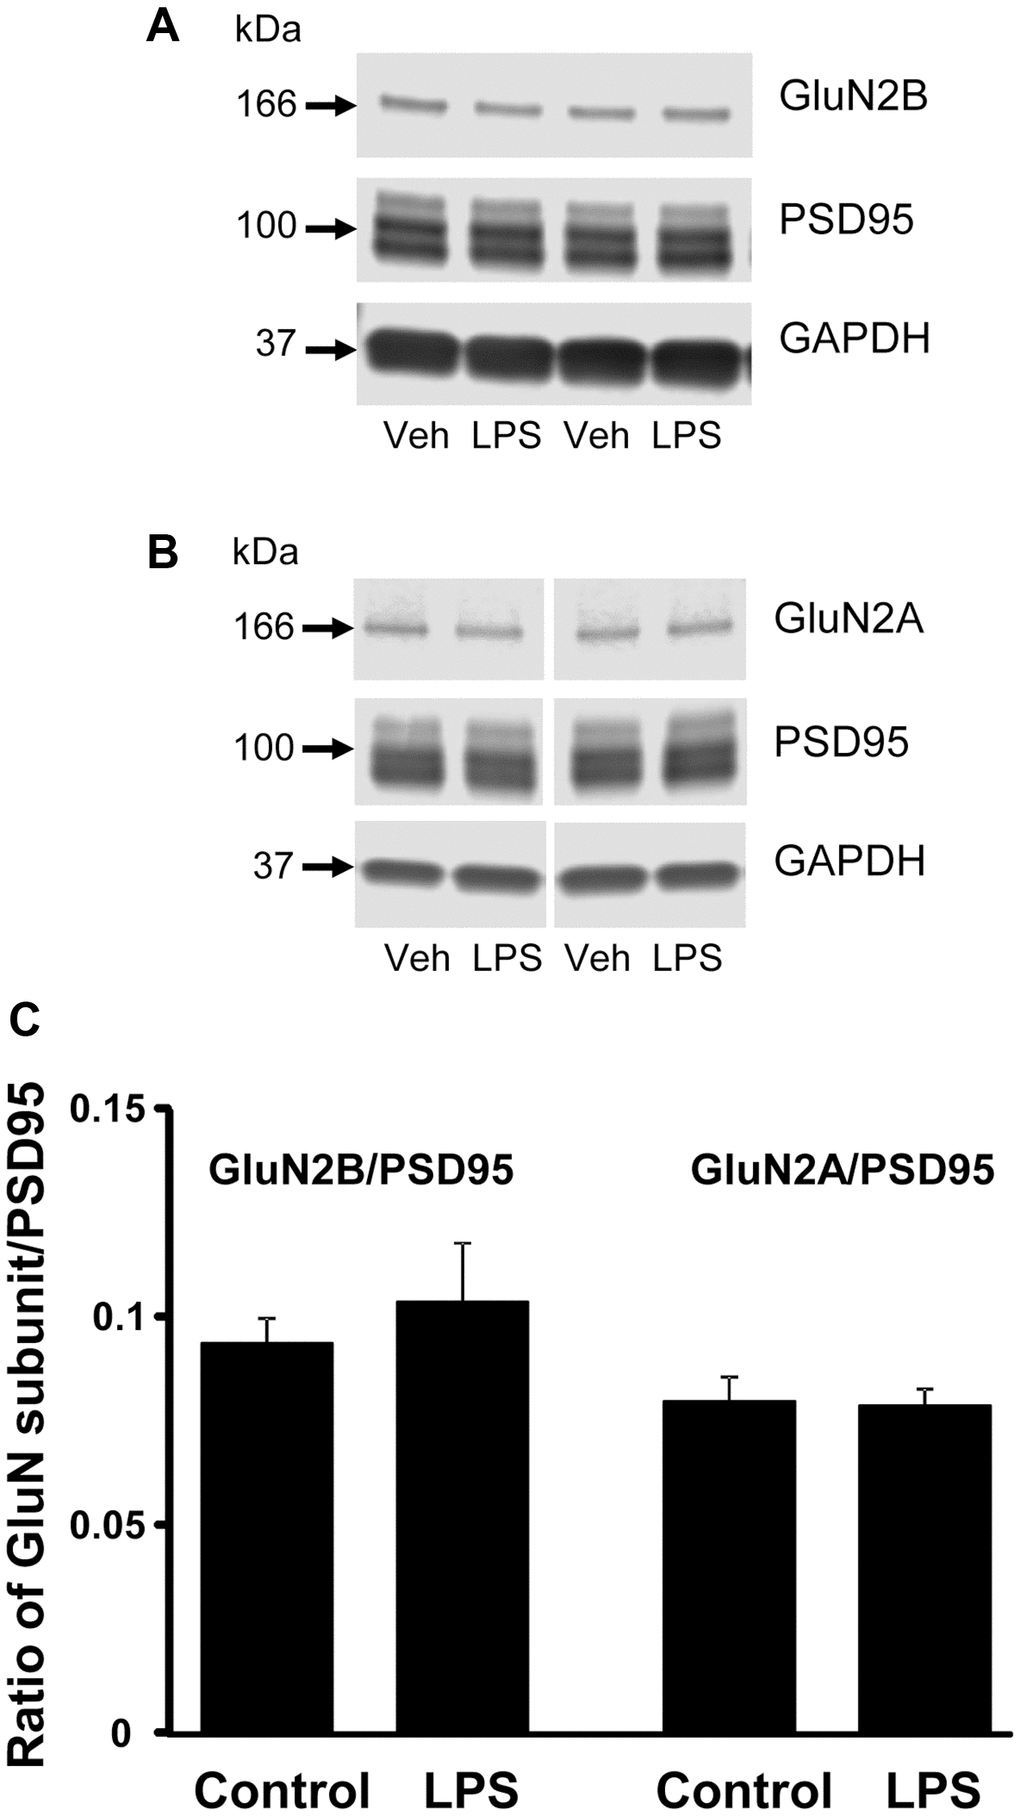 Western blot analysis of NMDAR subunit expression in CA1 region of hippocampus. The blots illustrate expression of (A) GluN2B, (B) GluN2A, and PSD95. (C) The bars represent the mean (± SEM) ratio of expression for vehicle (n = 4) and LPS treated (n = 4) animals.